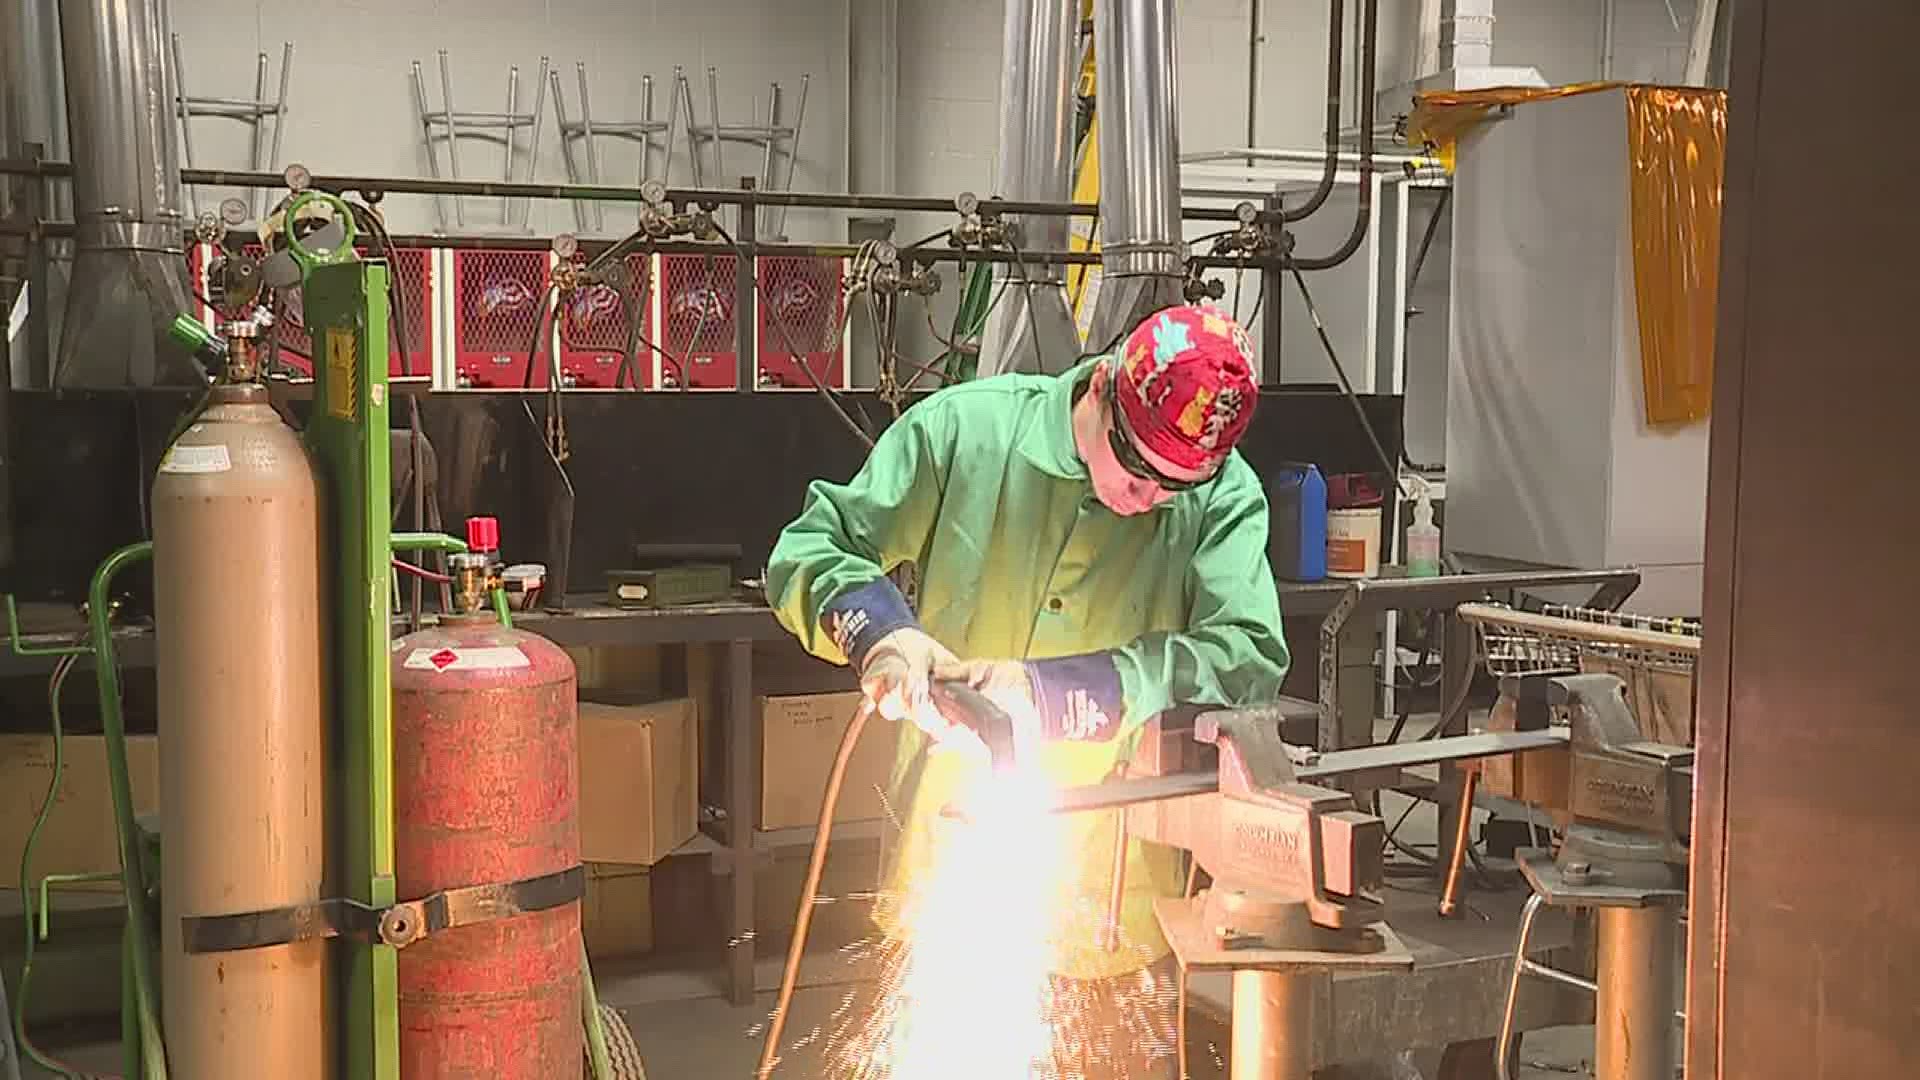 This is the first year for the welding apprenticeship at Clinton High School. Now, they want to grow the program.